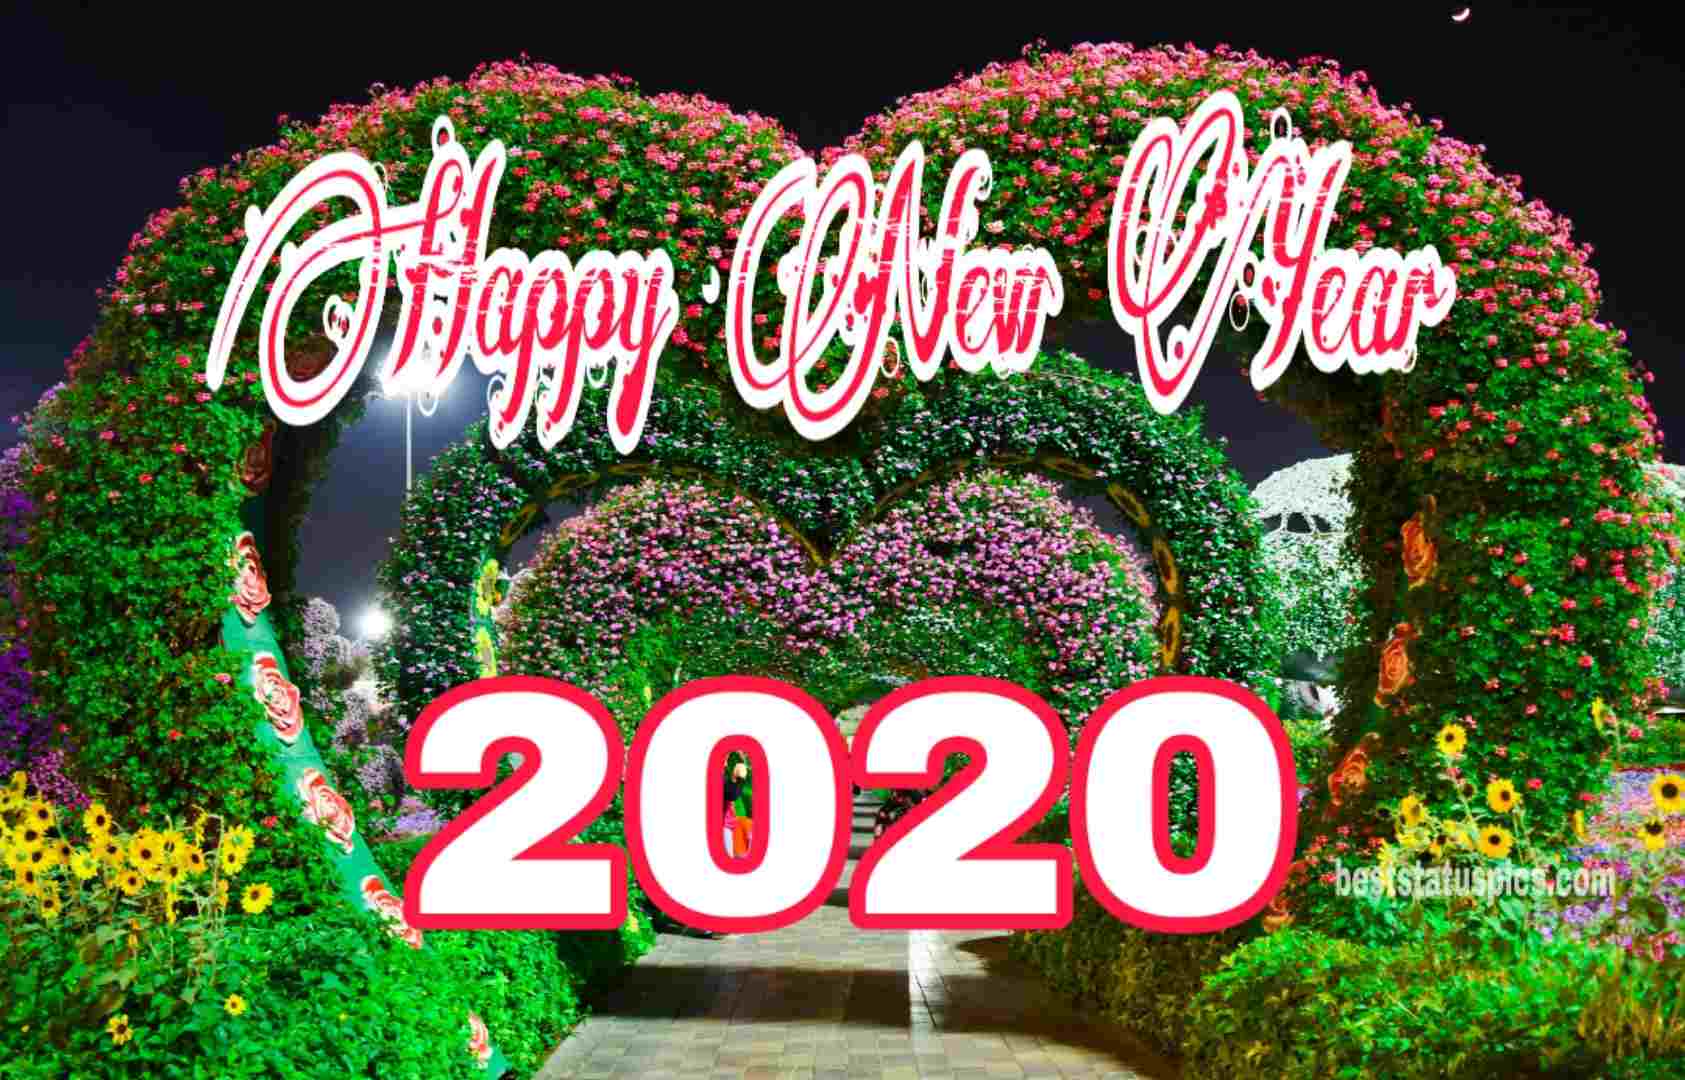 Happy New Year 2020 With Flowers - 1685x1080 Wallpaper 